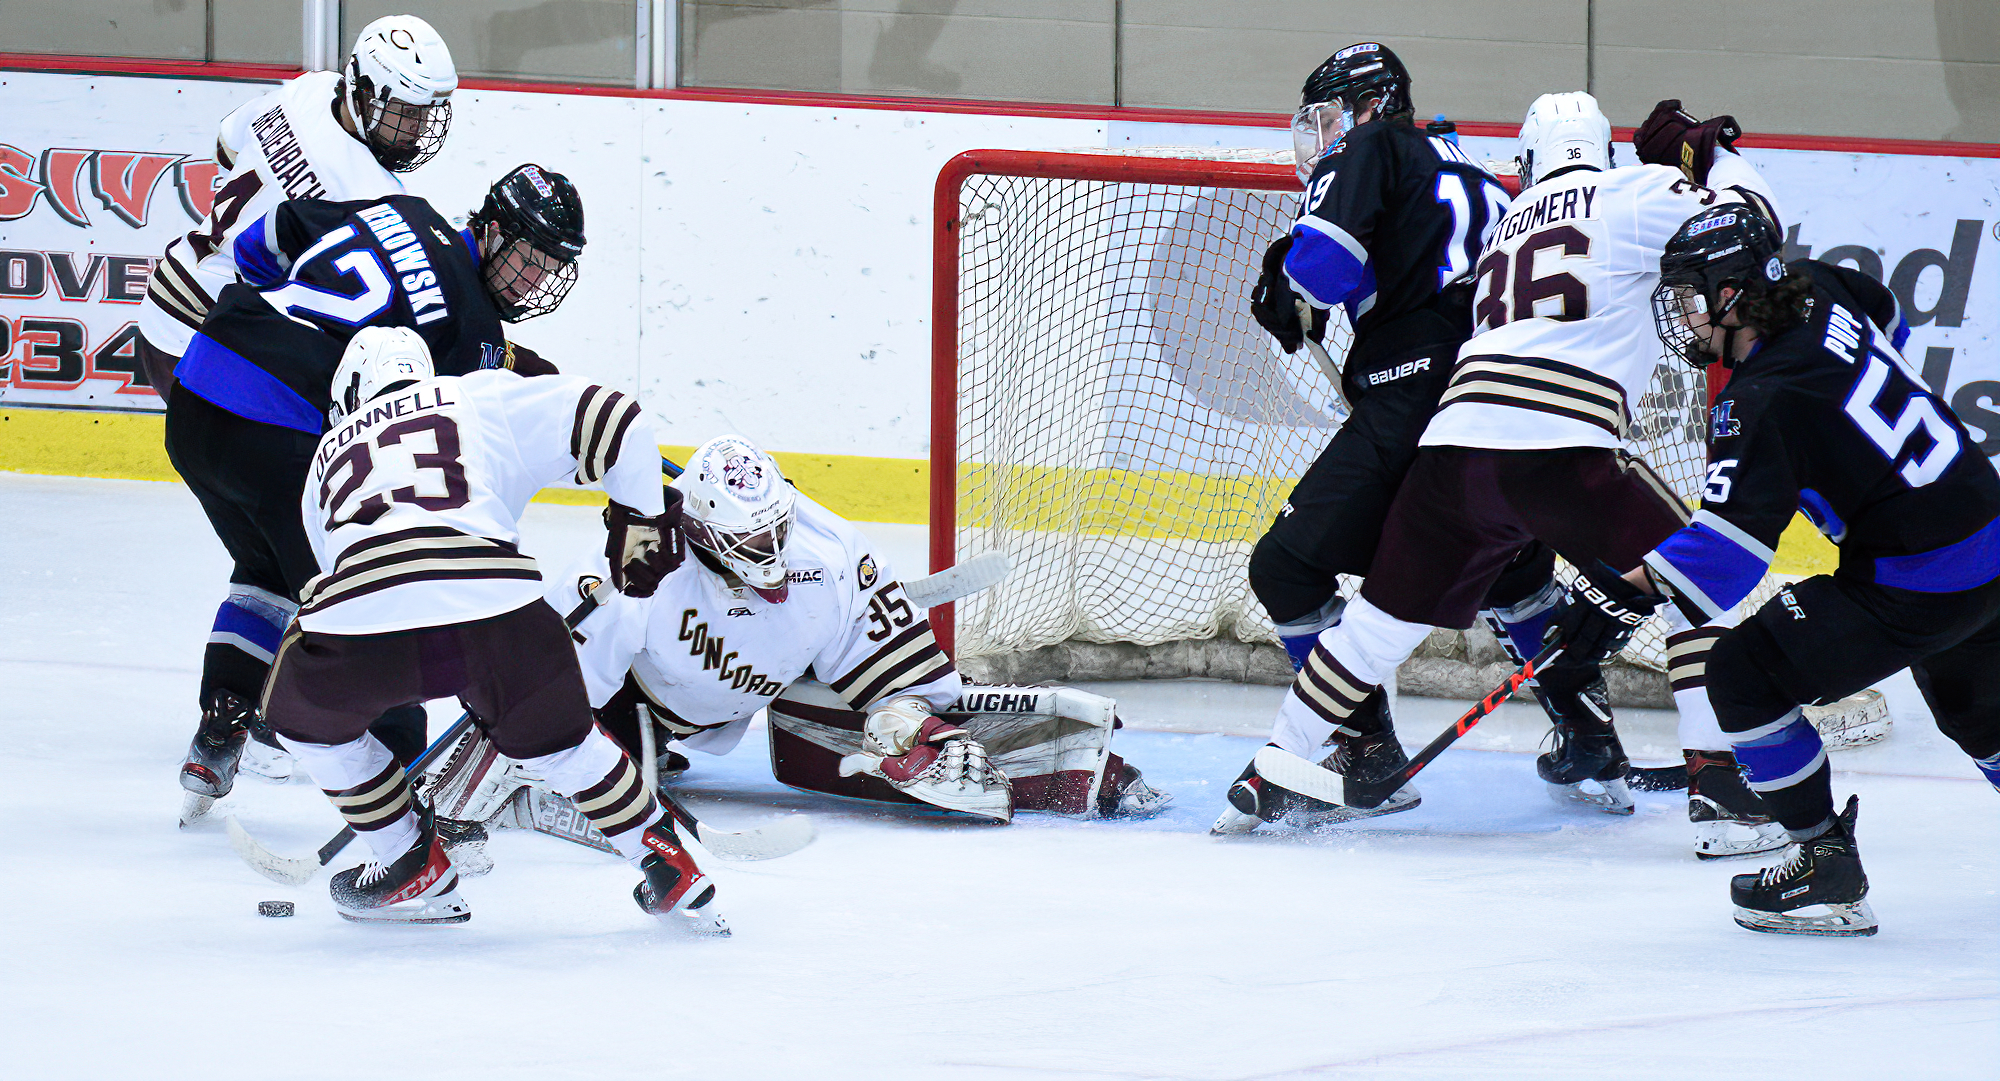 Jackson Nelson goes down to block the puck during the second period of the Cobbers' win over Marian. Nelson had 29 saves in the win.